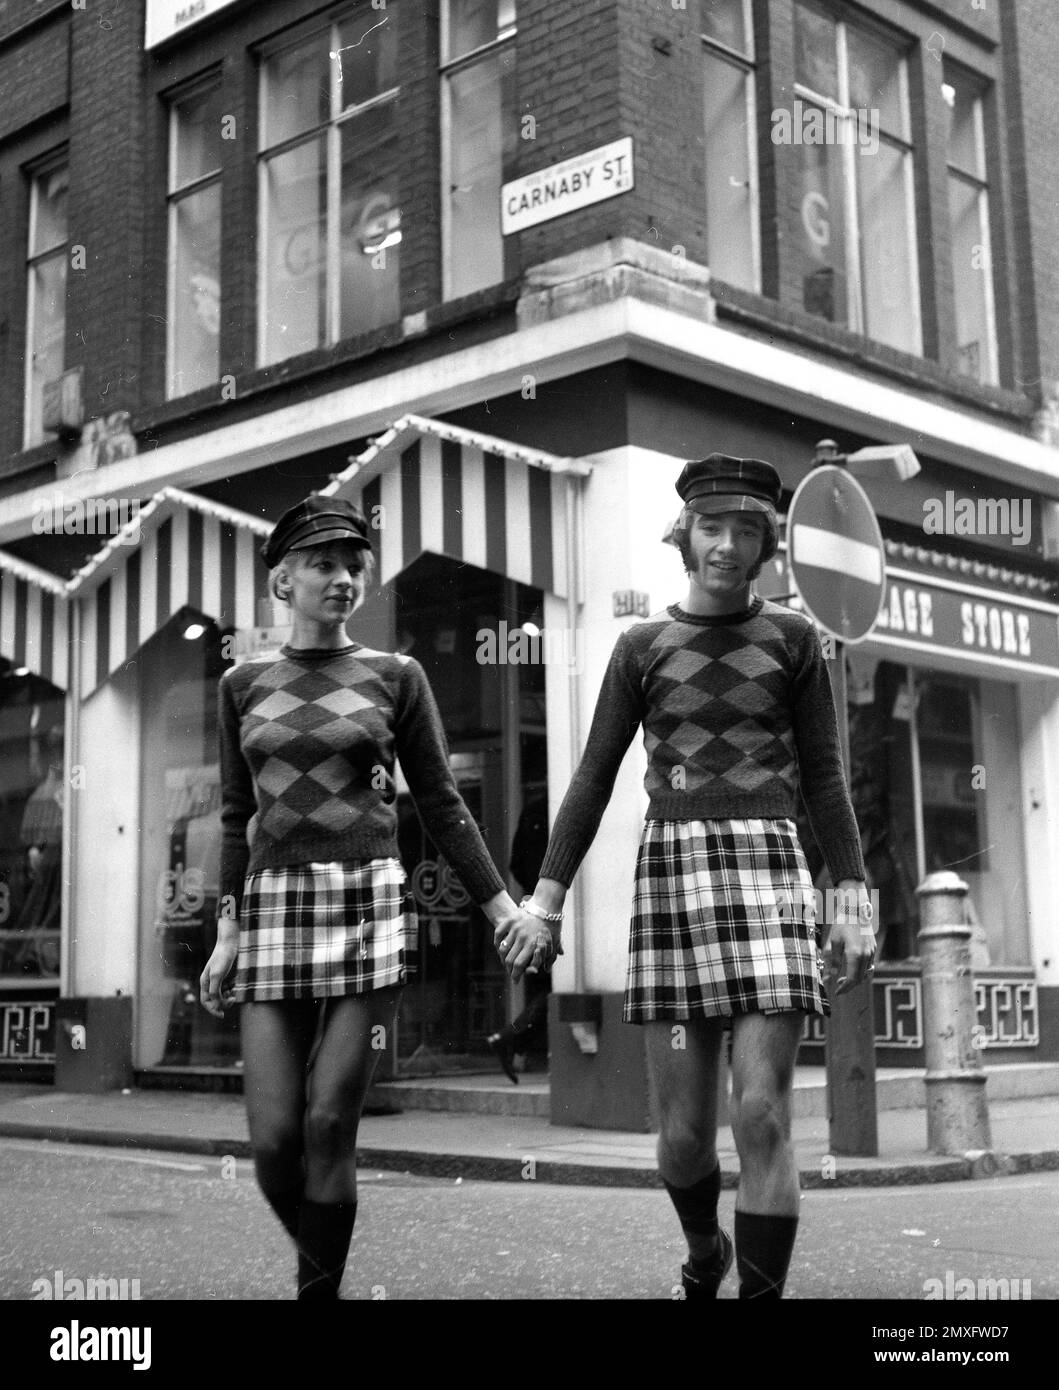 His and hers fashion in Carnaby Street, London 1968 Stock Photo